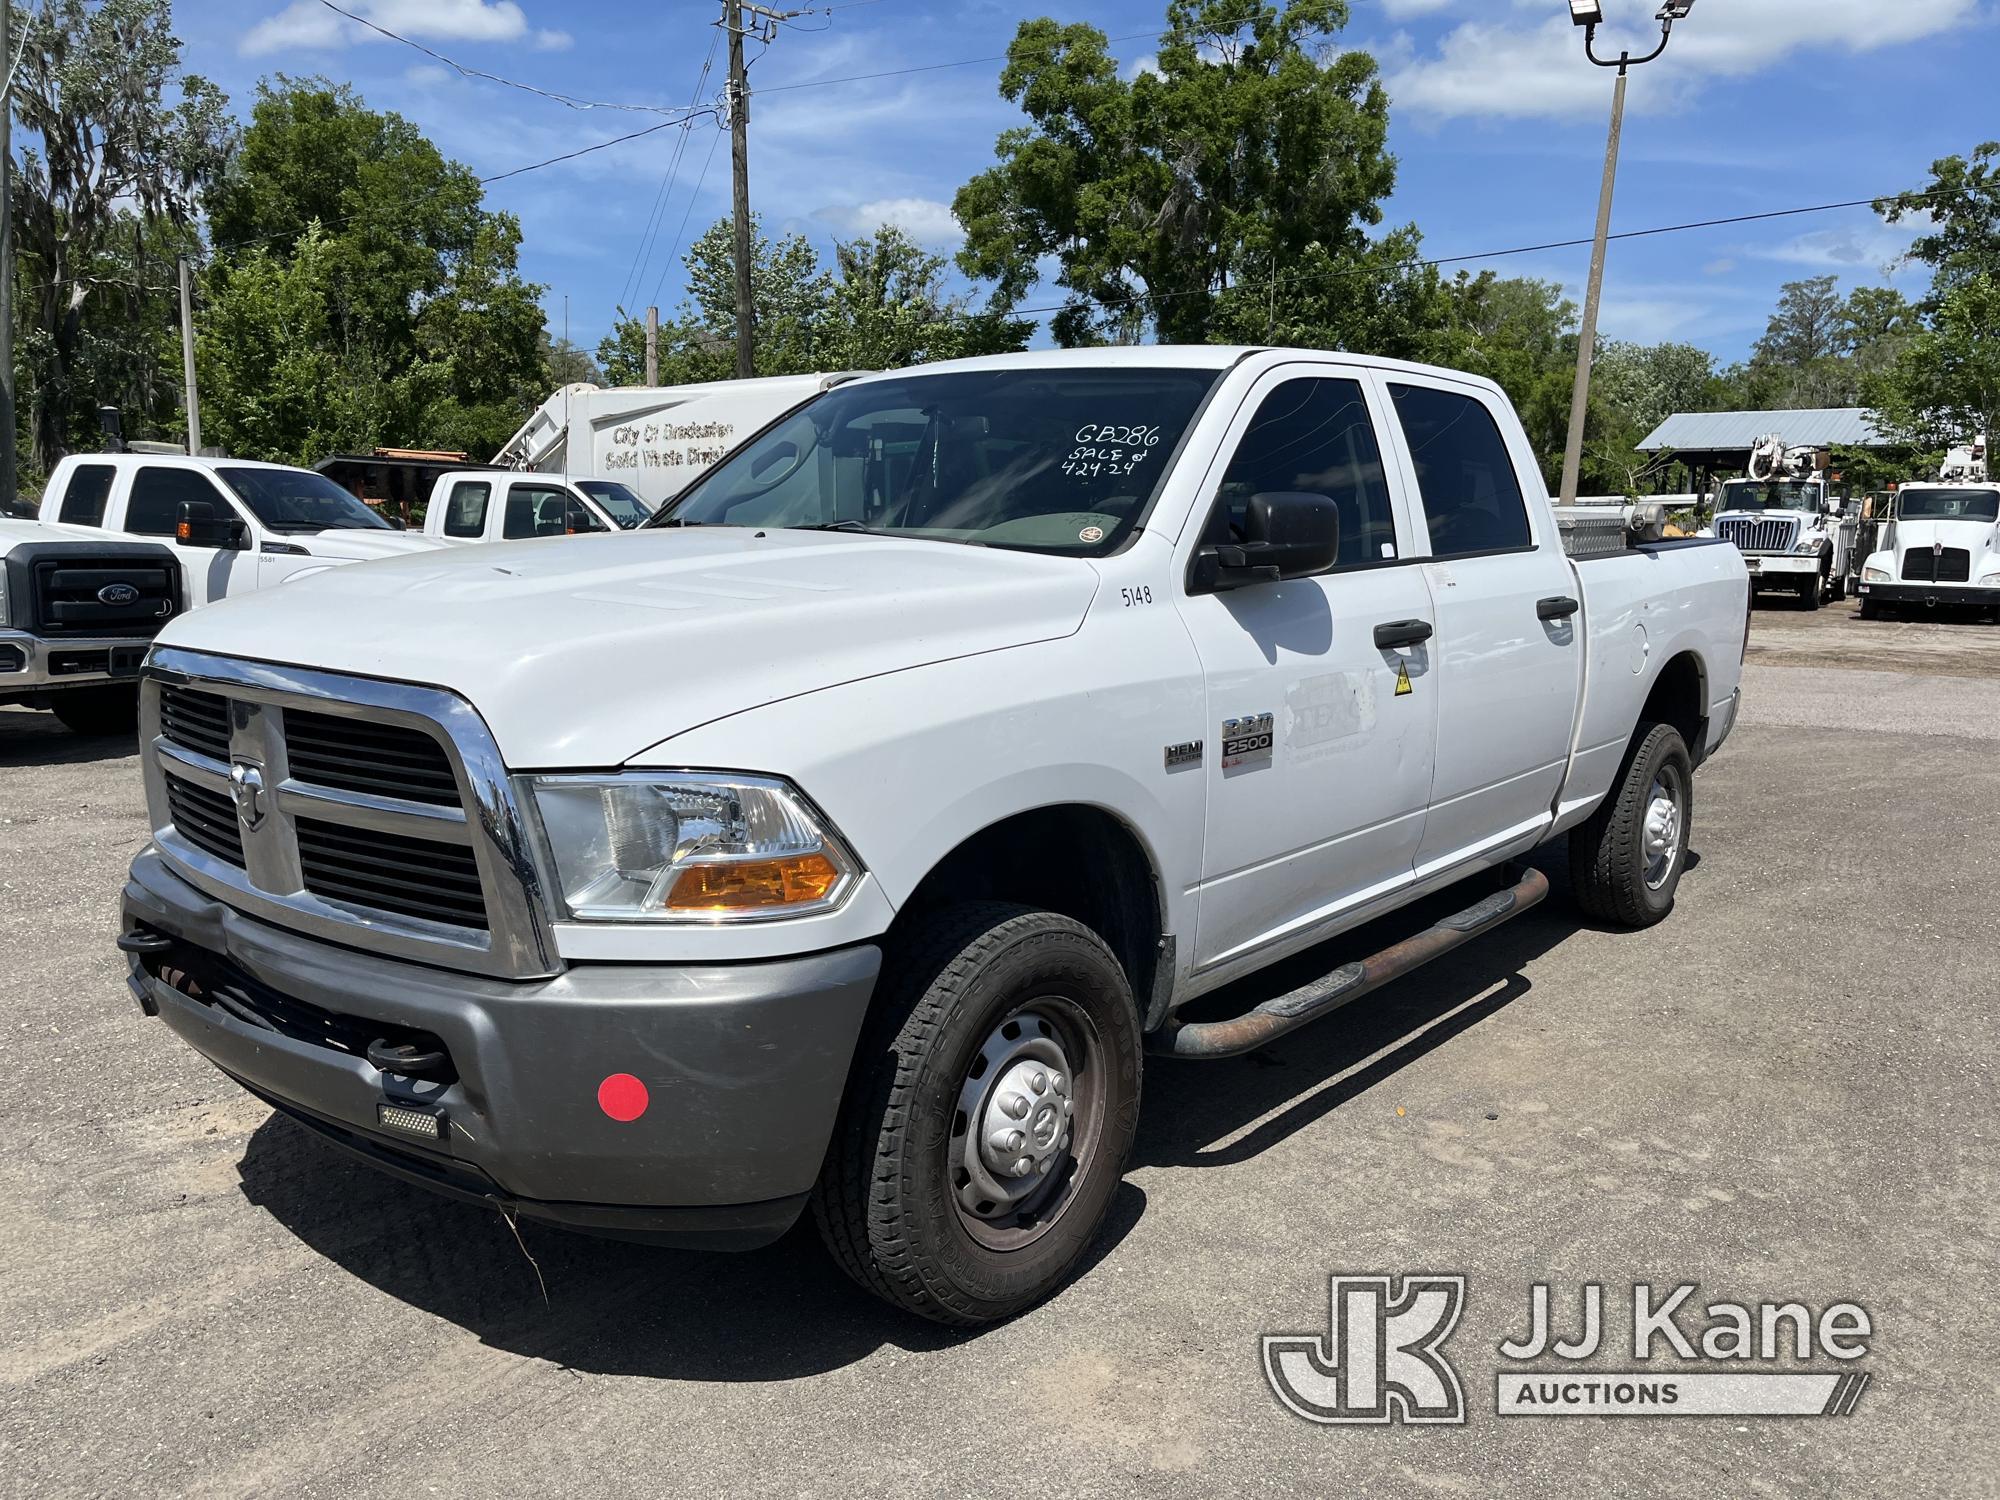 (Tampa, FL) 2011 RAM 2500 4x4 Crew-Cab Pickup Truck, Electric Company Owned & Maintained. Runs & Mov